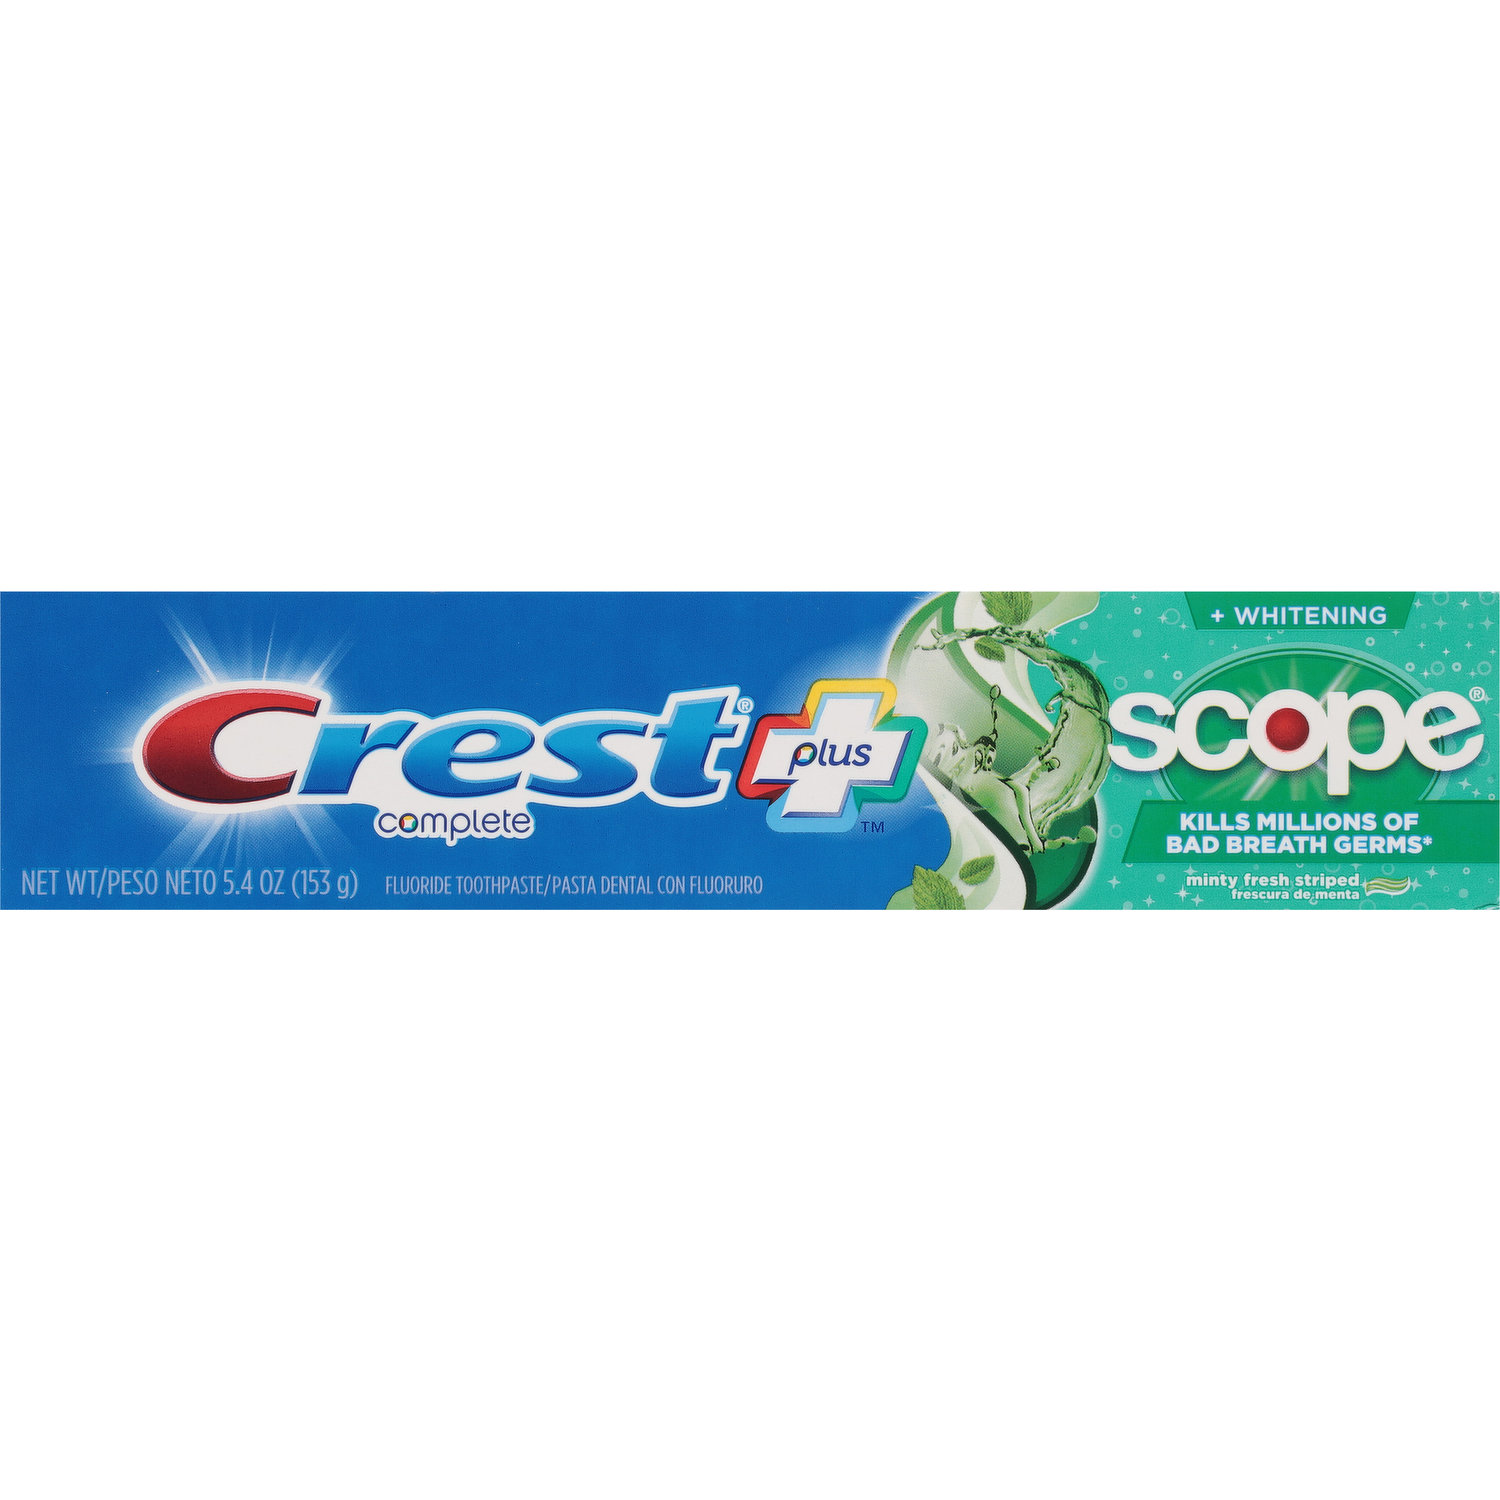 Crest + Scope Minty Fresh Complete Whitening Toothpaste, 5.4 oz